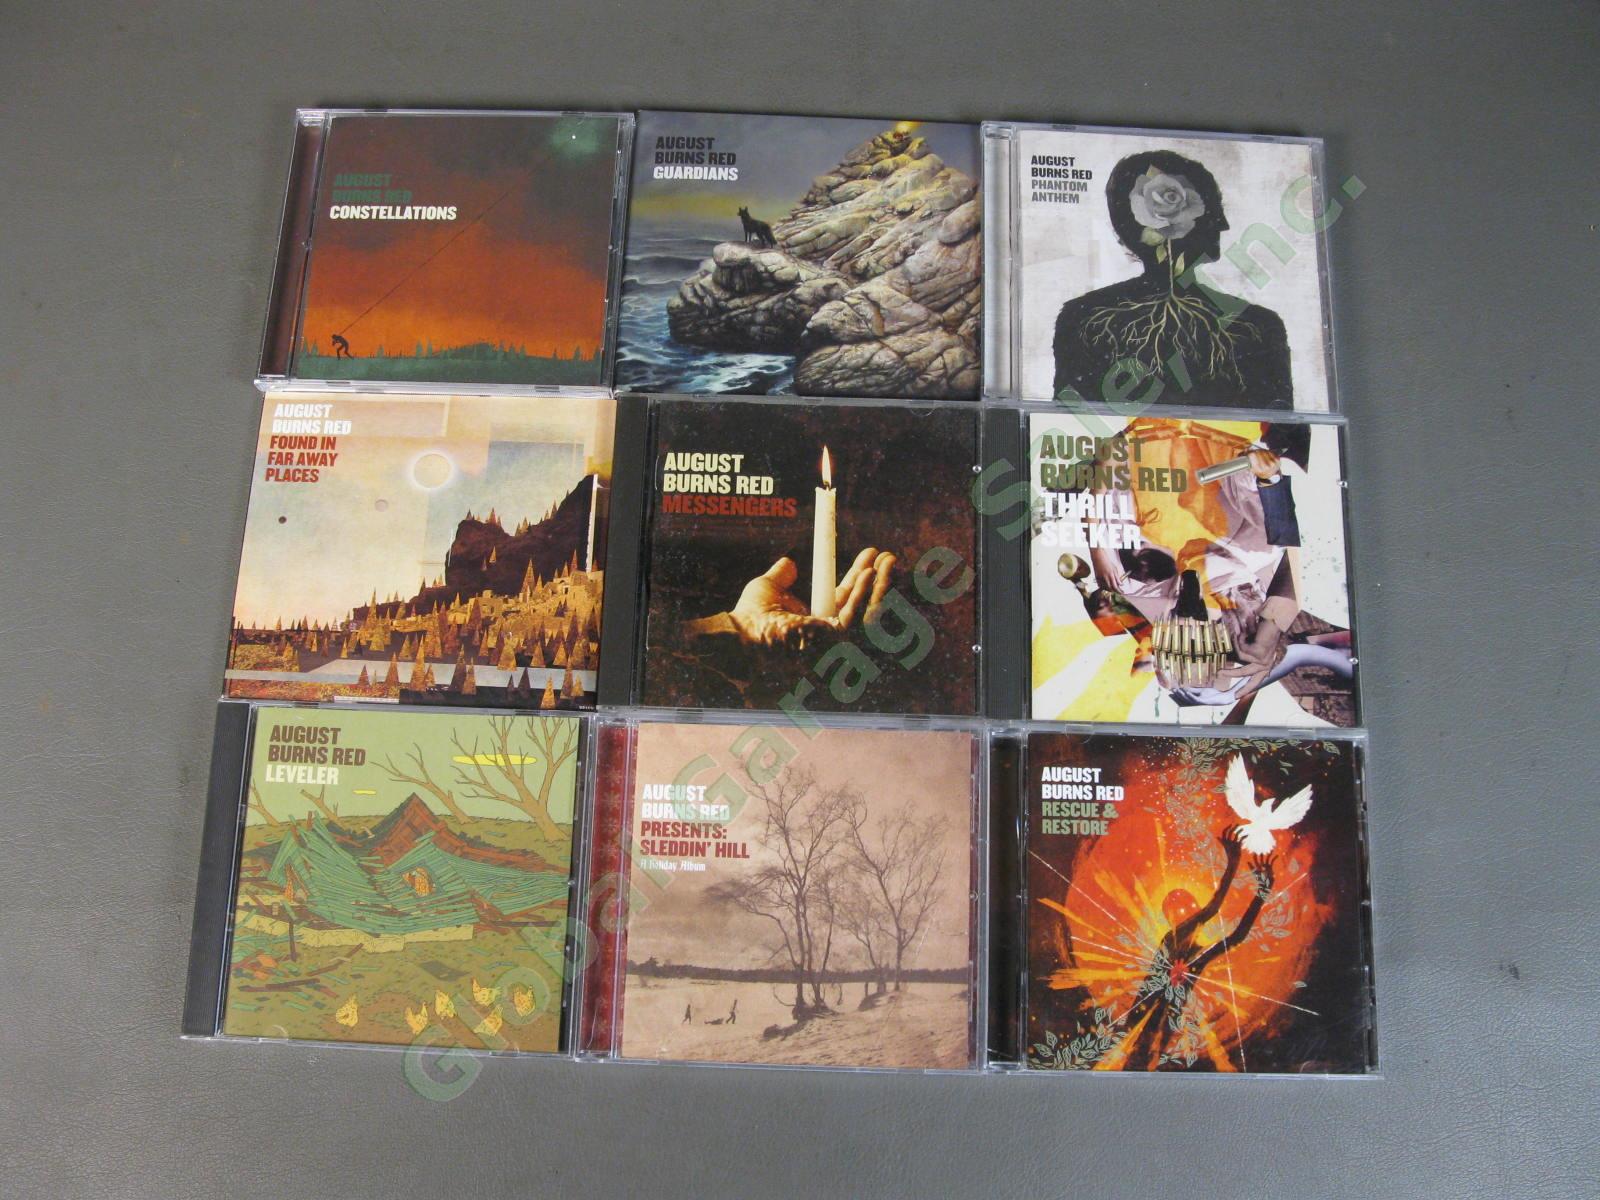 9 August Burns Red COMPLETE CD LOT Constellations Guardians Leveler Messengers 1